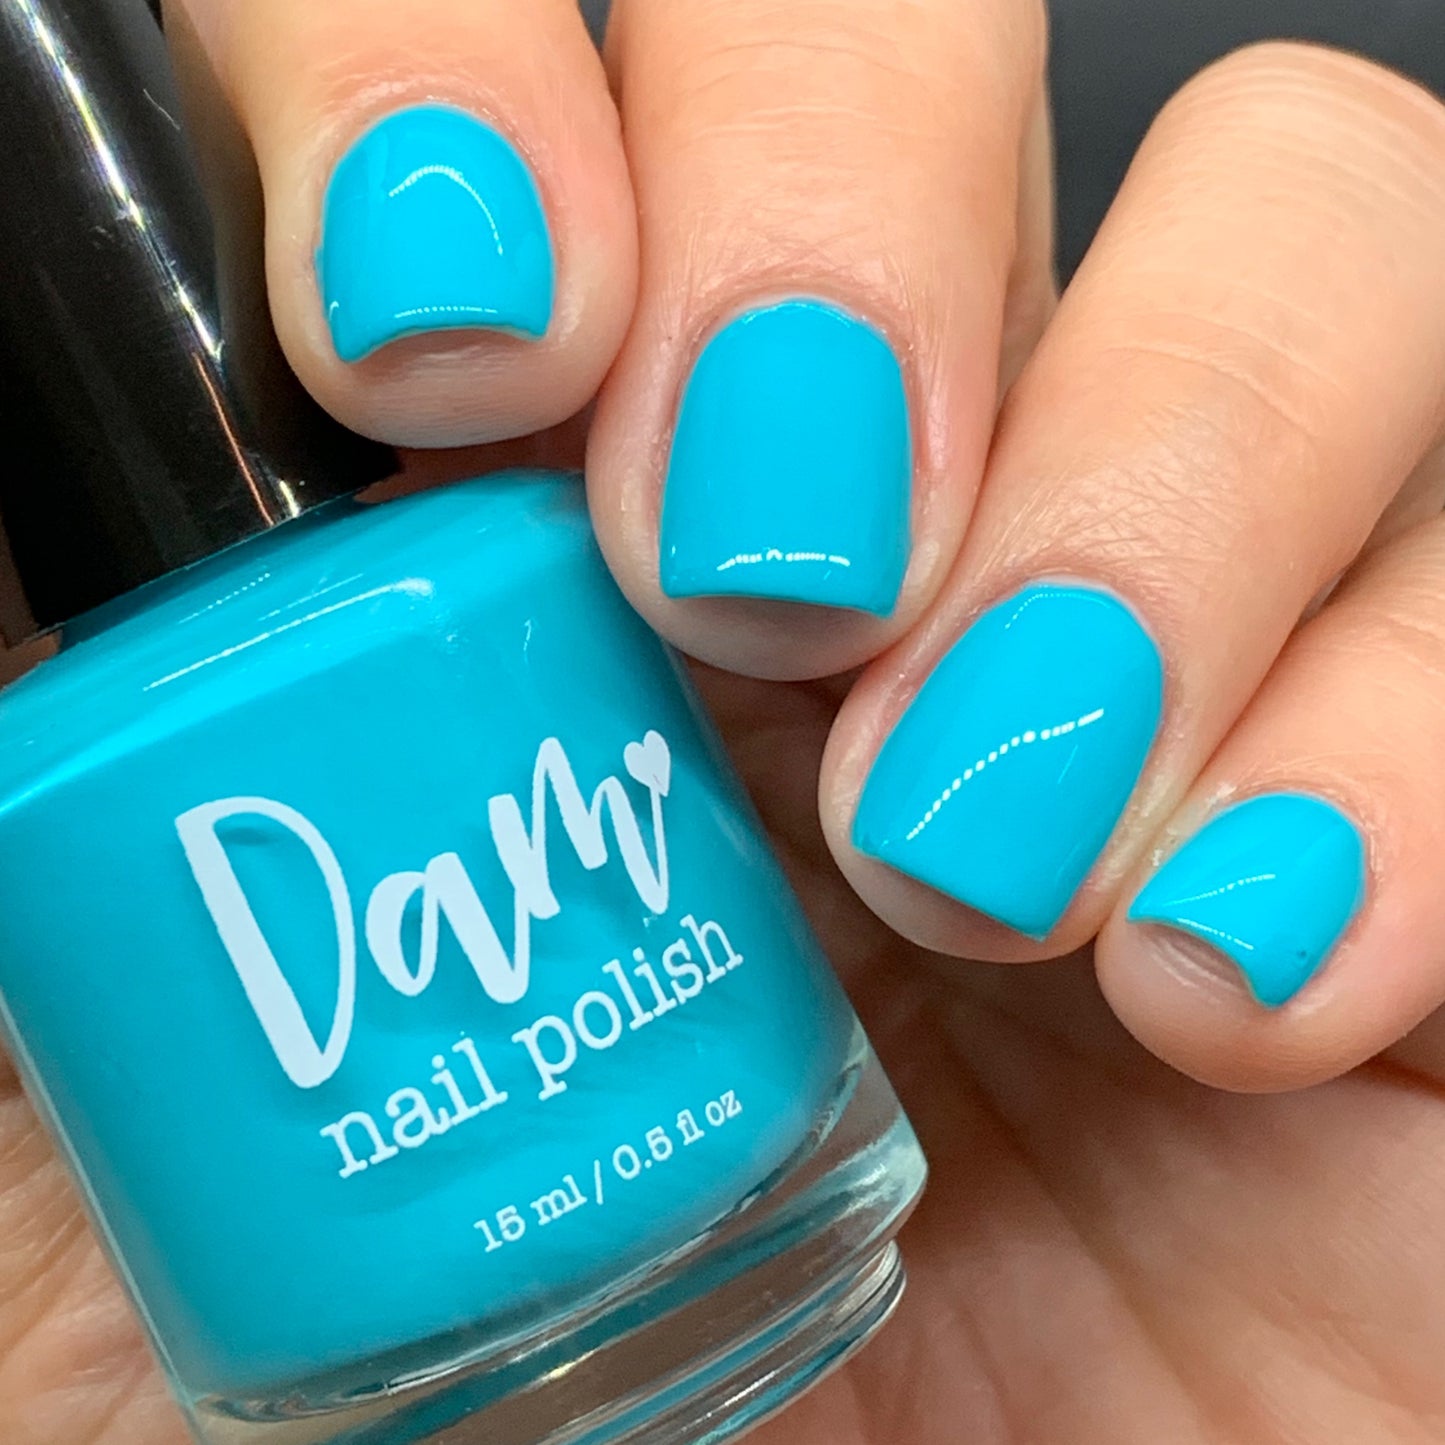 Third Scoops a Charm - Teal Creme Nail Polish - Limited Edition Creme Connection Facebook Group Custom